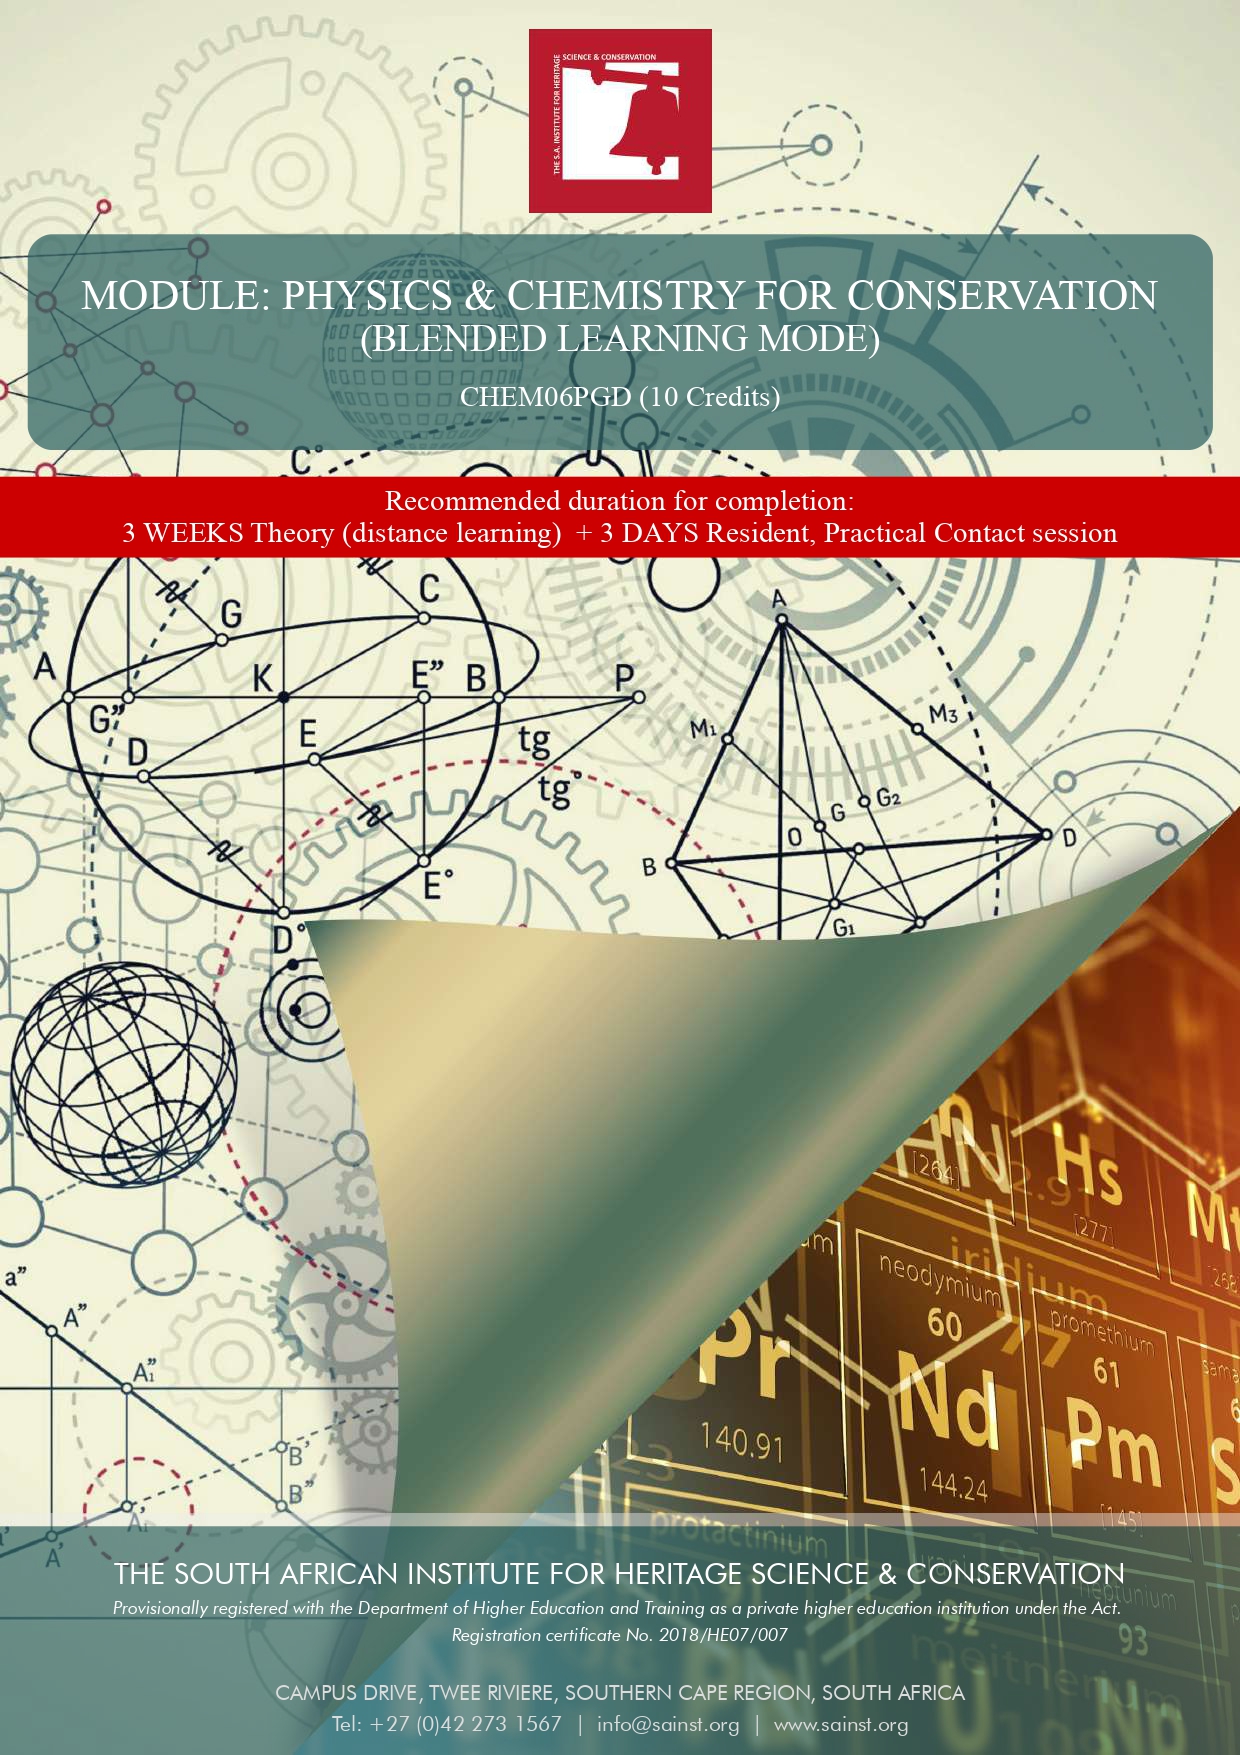 Physics & Chemistry for Conservation